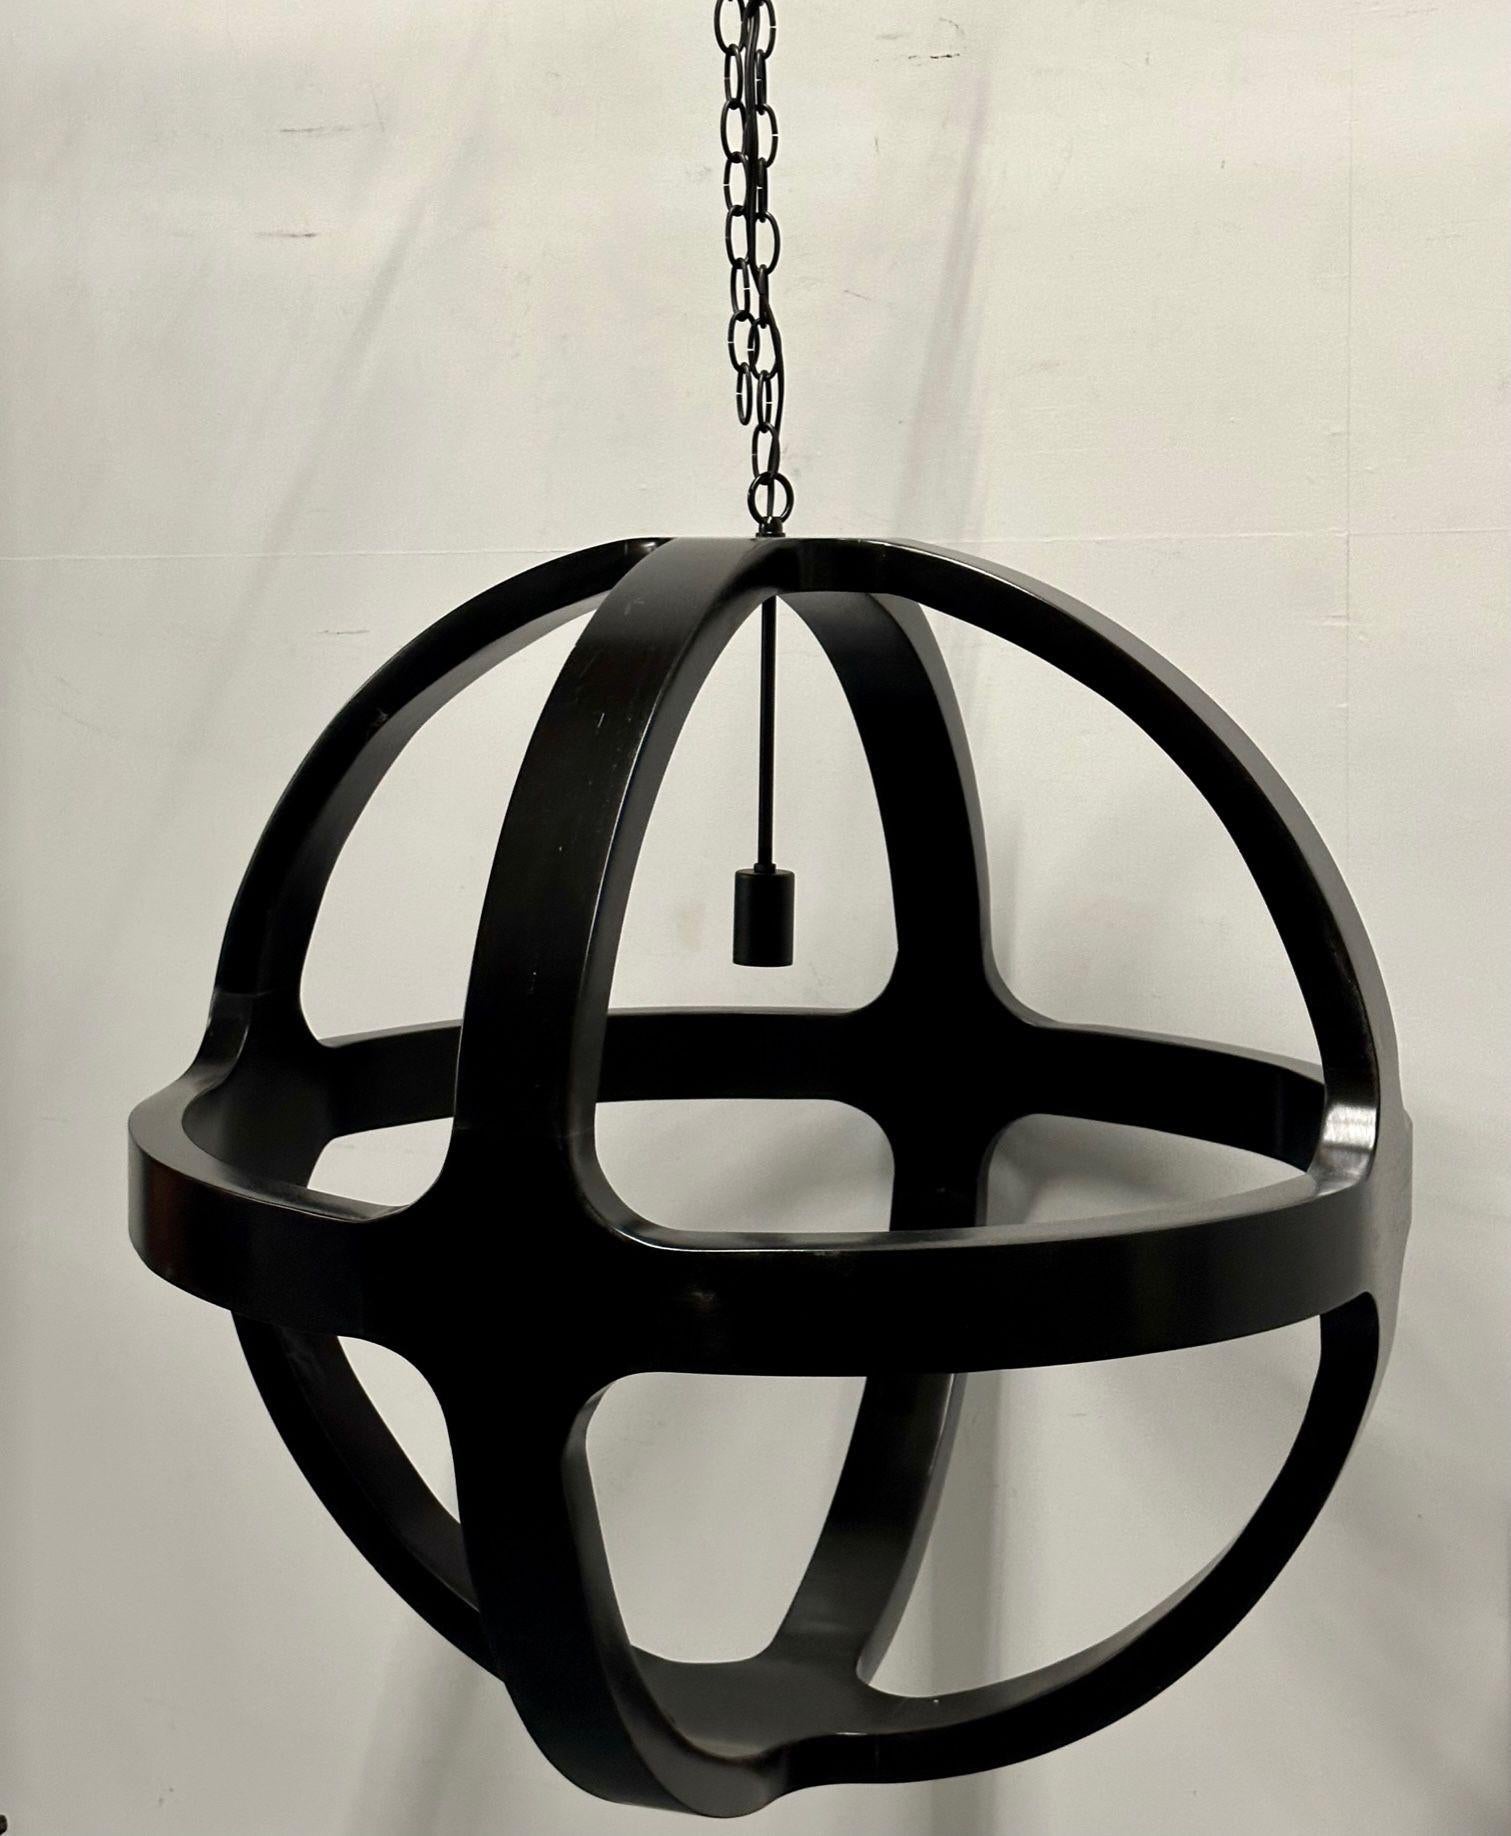 Modern Ebony Circular Chandelier / Lighting Pendant, Contemporary In Good Condition For Sale In Stamford, CT